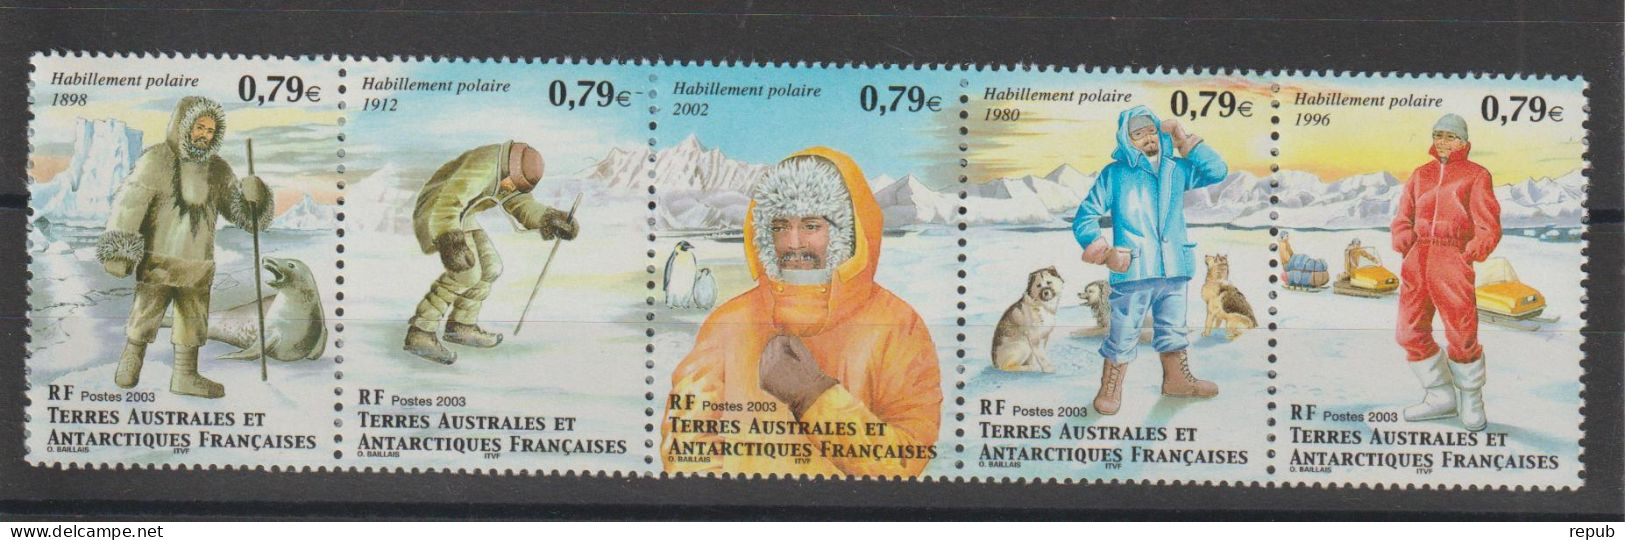 TAAF 2003 Timbres Issus Du Carnet, 352-356, 5 Val ** MNH - Nuovi